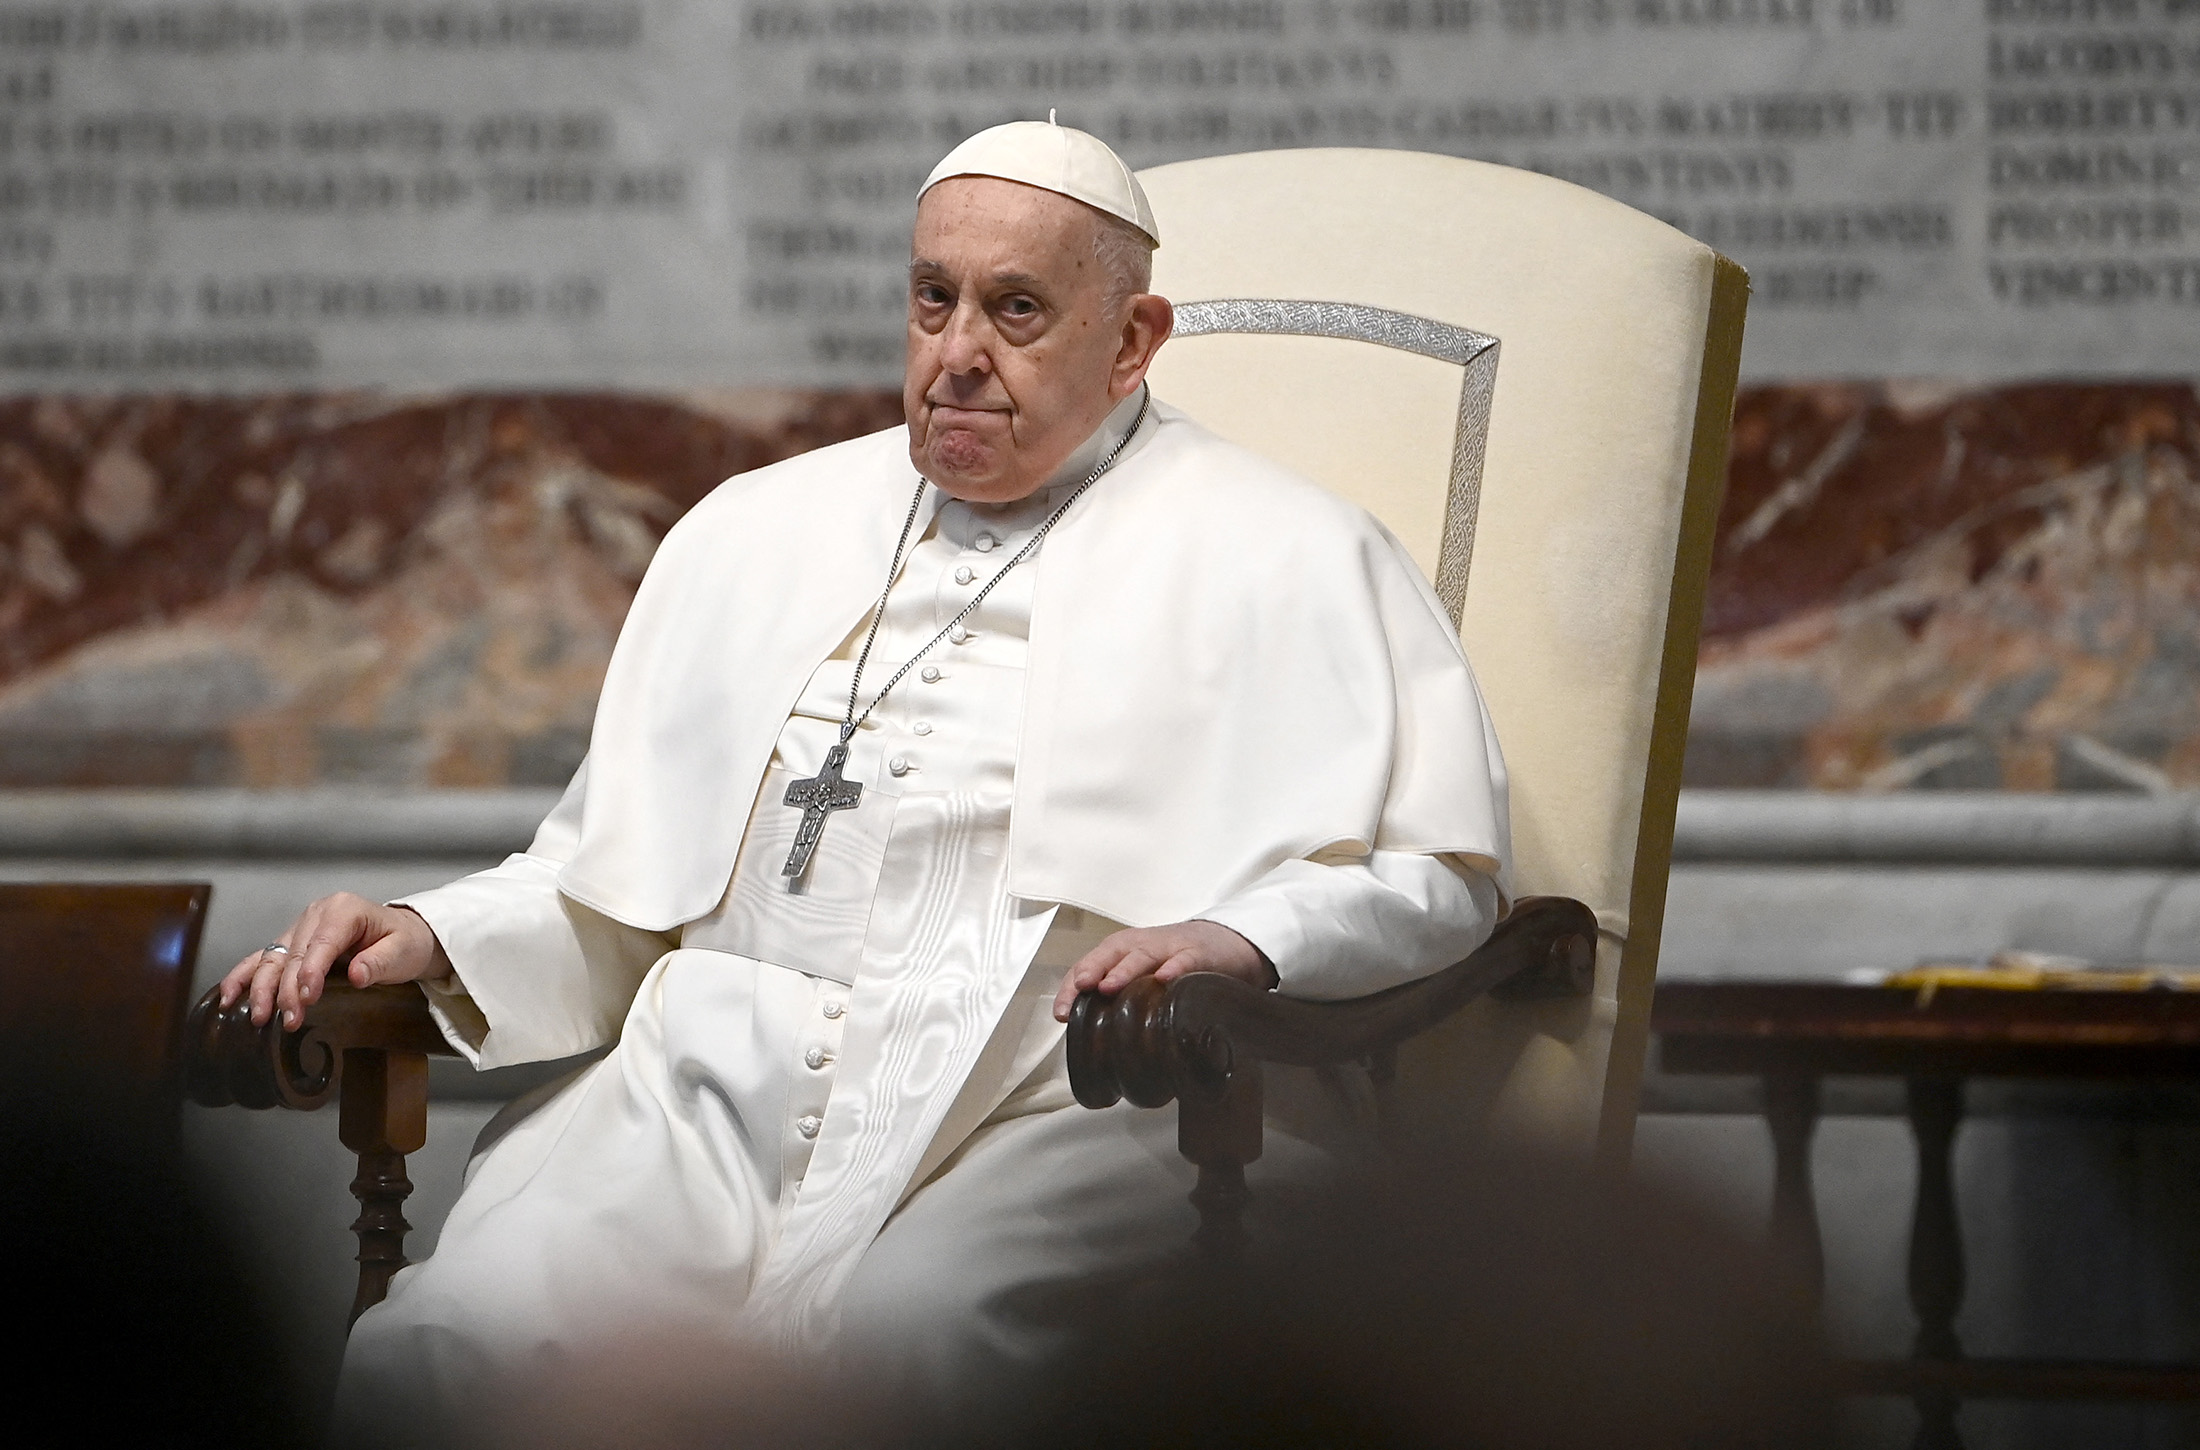 Pope Says Ukraine Should Have White Flag Courage, Negotiate War's End - Bloomberg